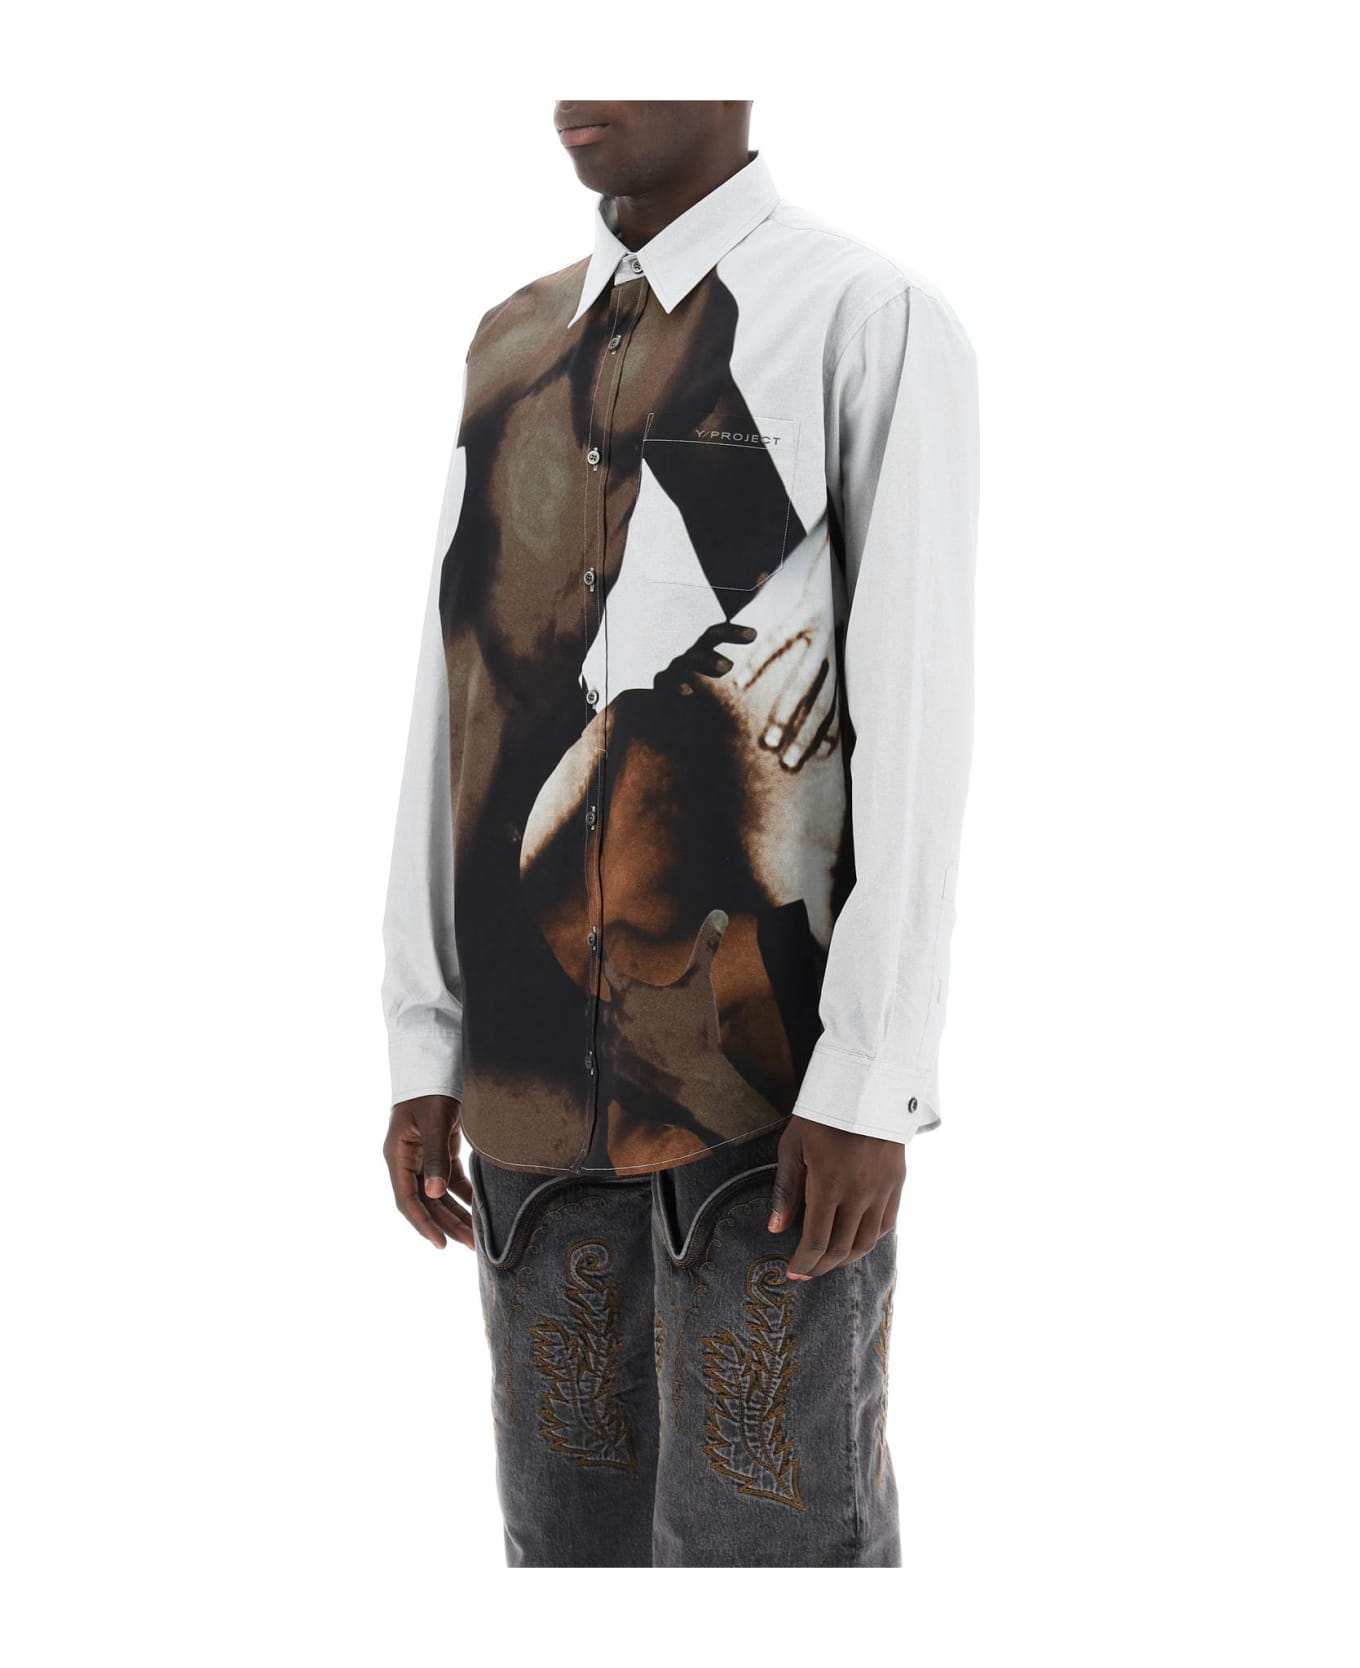 Y/Project Body Collage Shirt - WHITE (Grey)